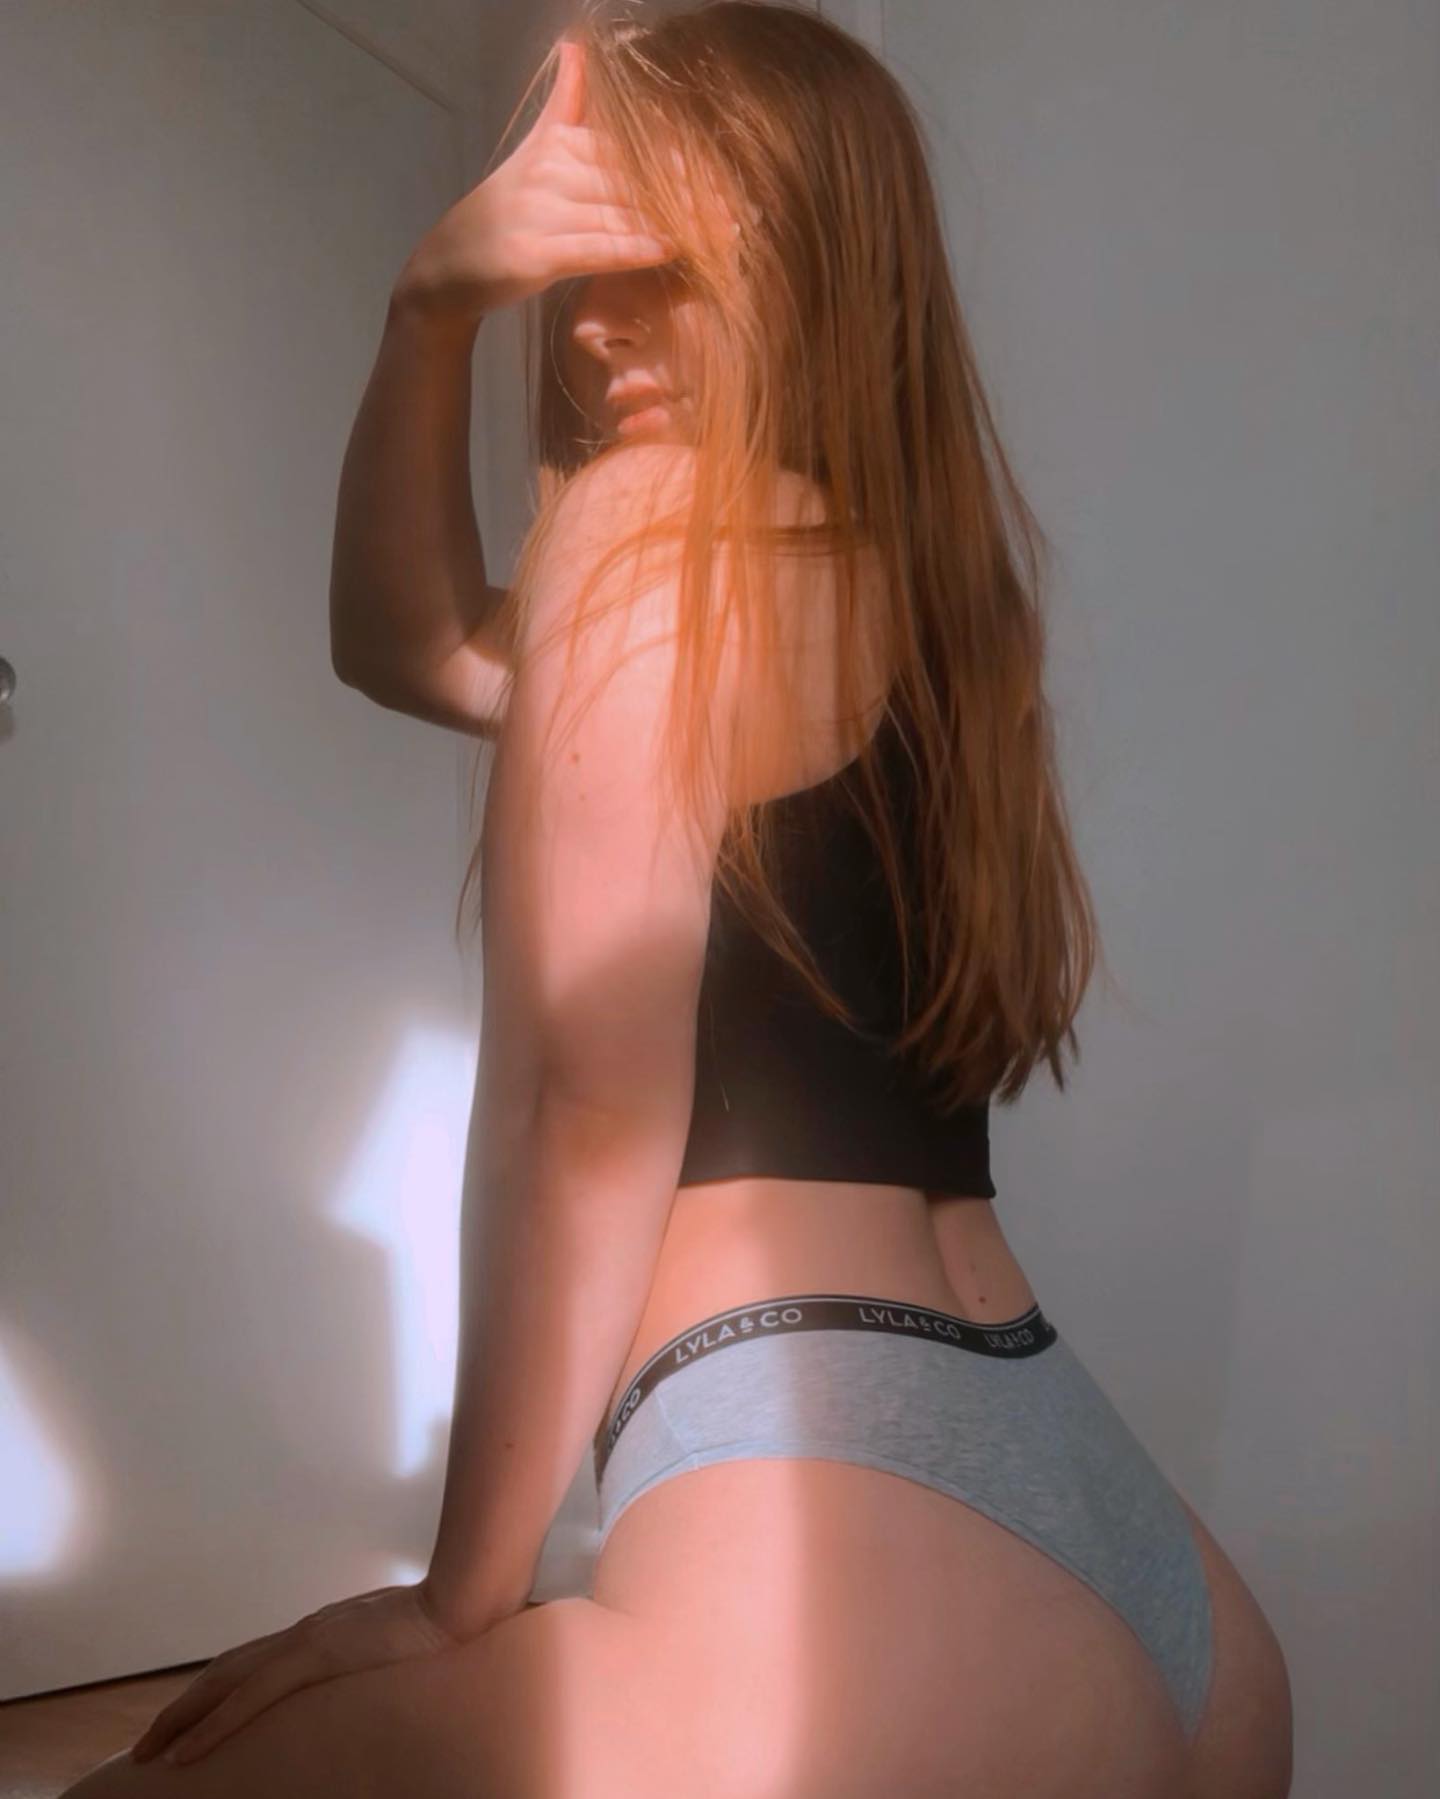 Afternoon sun blinding me 🙈 
☀️ 
🍑 
#sunset #afternoon #bööty #peach #workout #sunsetvibes #goldenhour #onlyfans #australia #bigbootygirls #pose #bi #ass #phat #thicc #thickthighssavelives #of